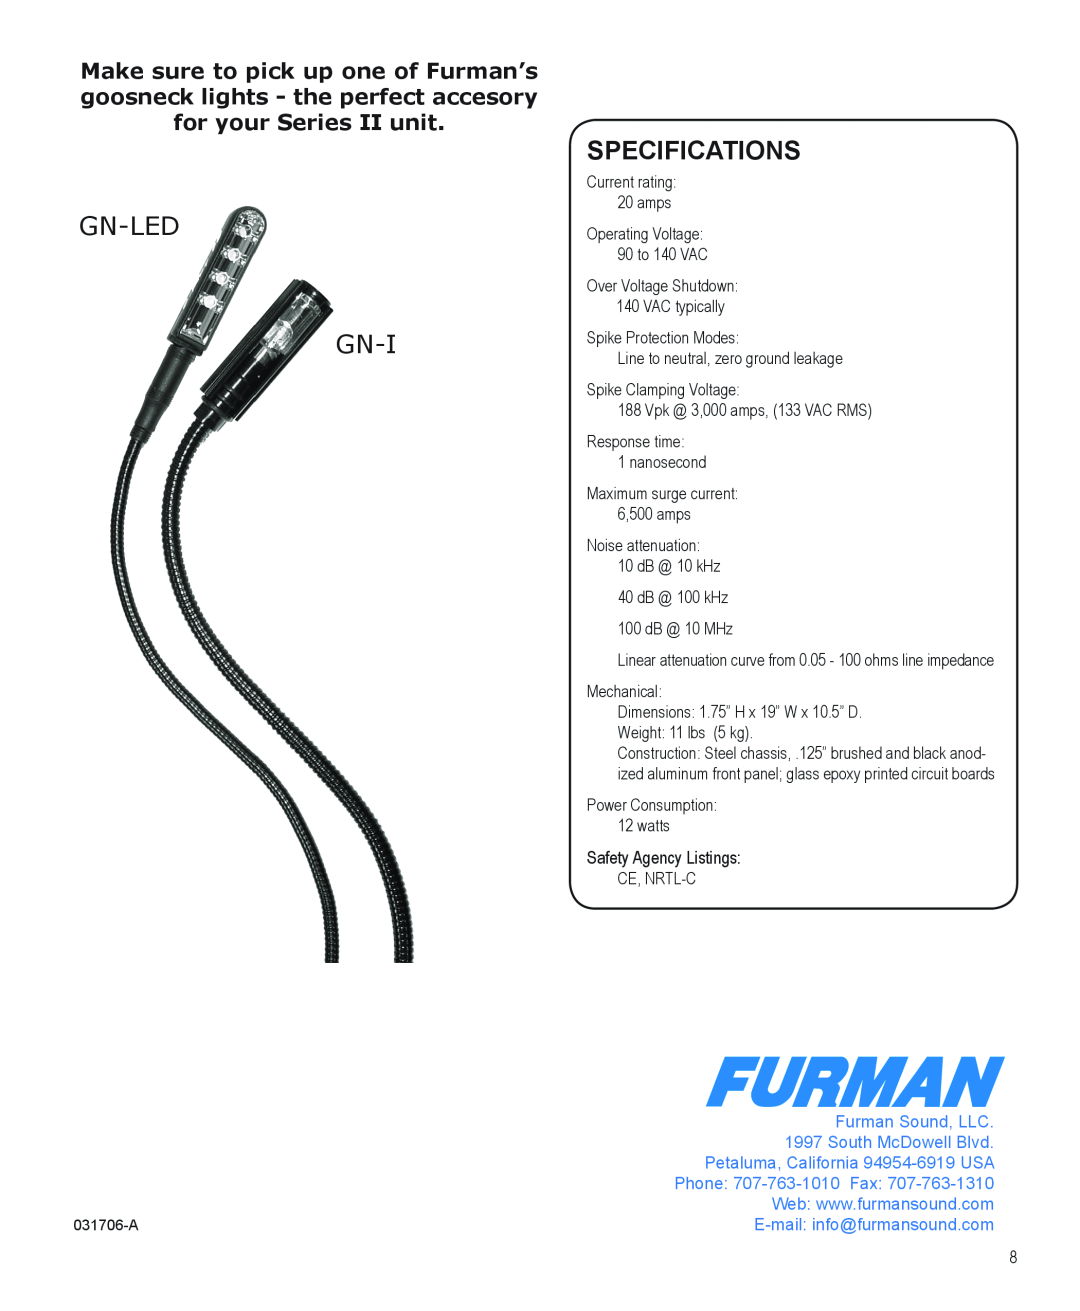 Furman Sound P-8 PRO II manual Gn-Led Gn-I, Specifications, Make sure to pick up one of Furman’s, for your Series II unit 